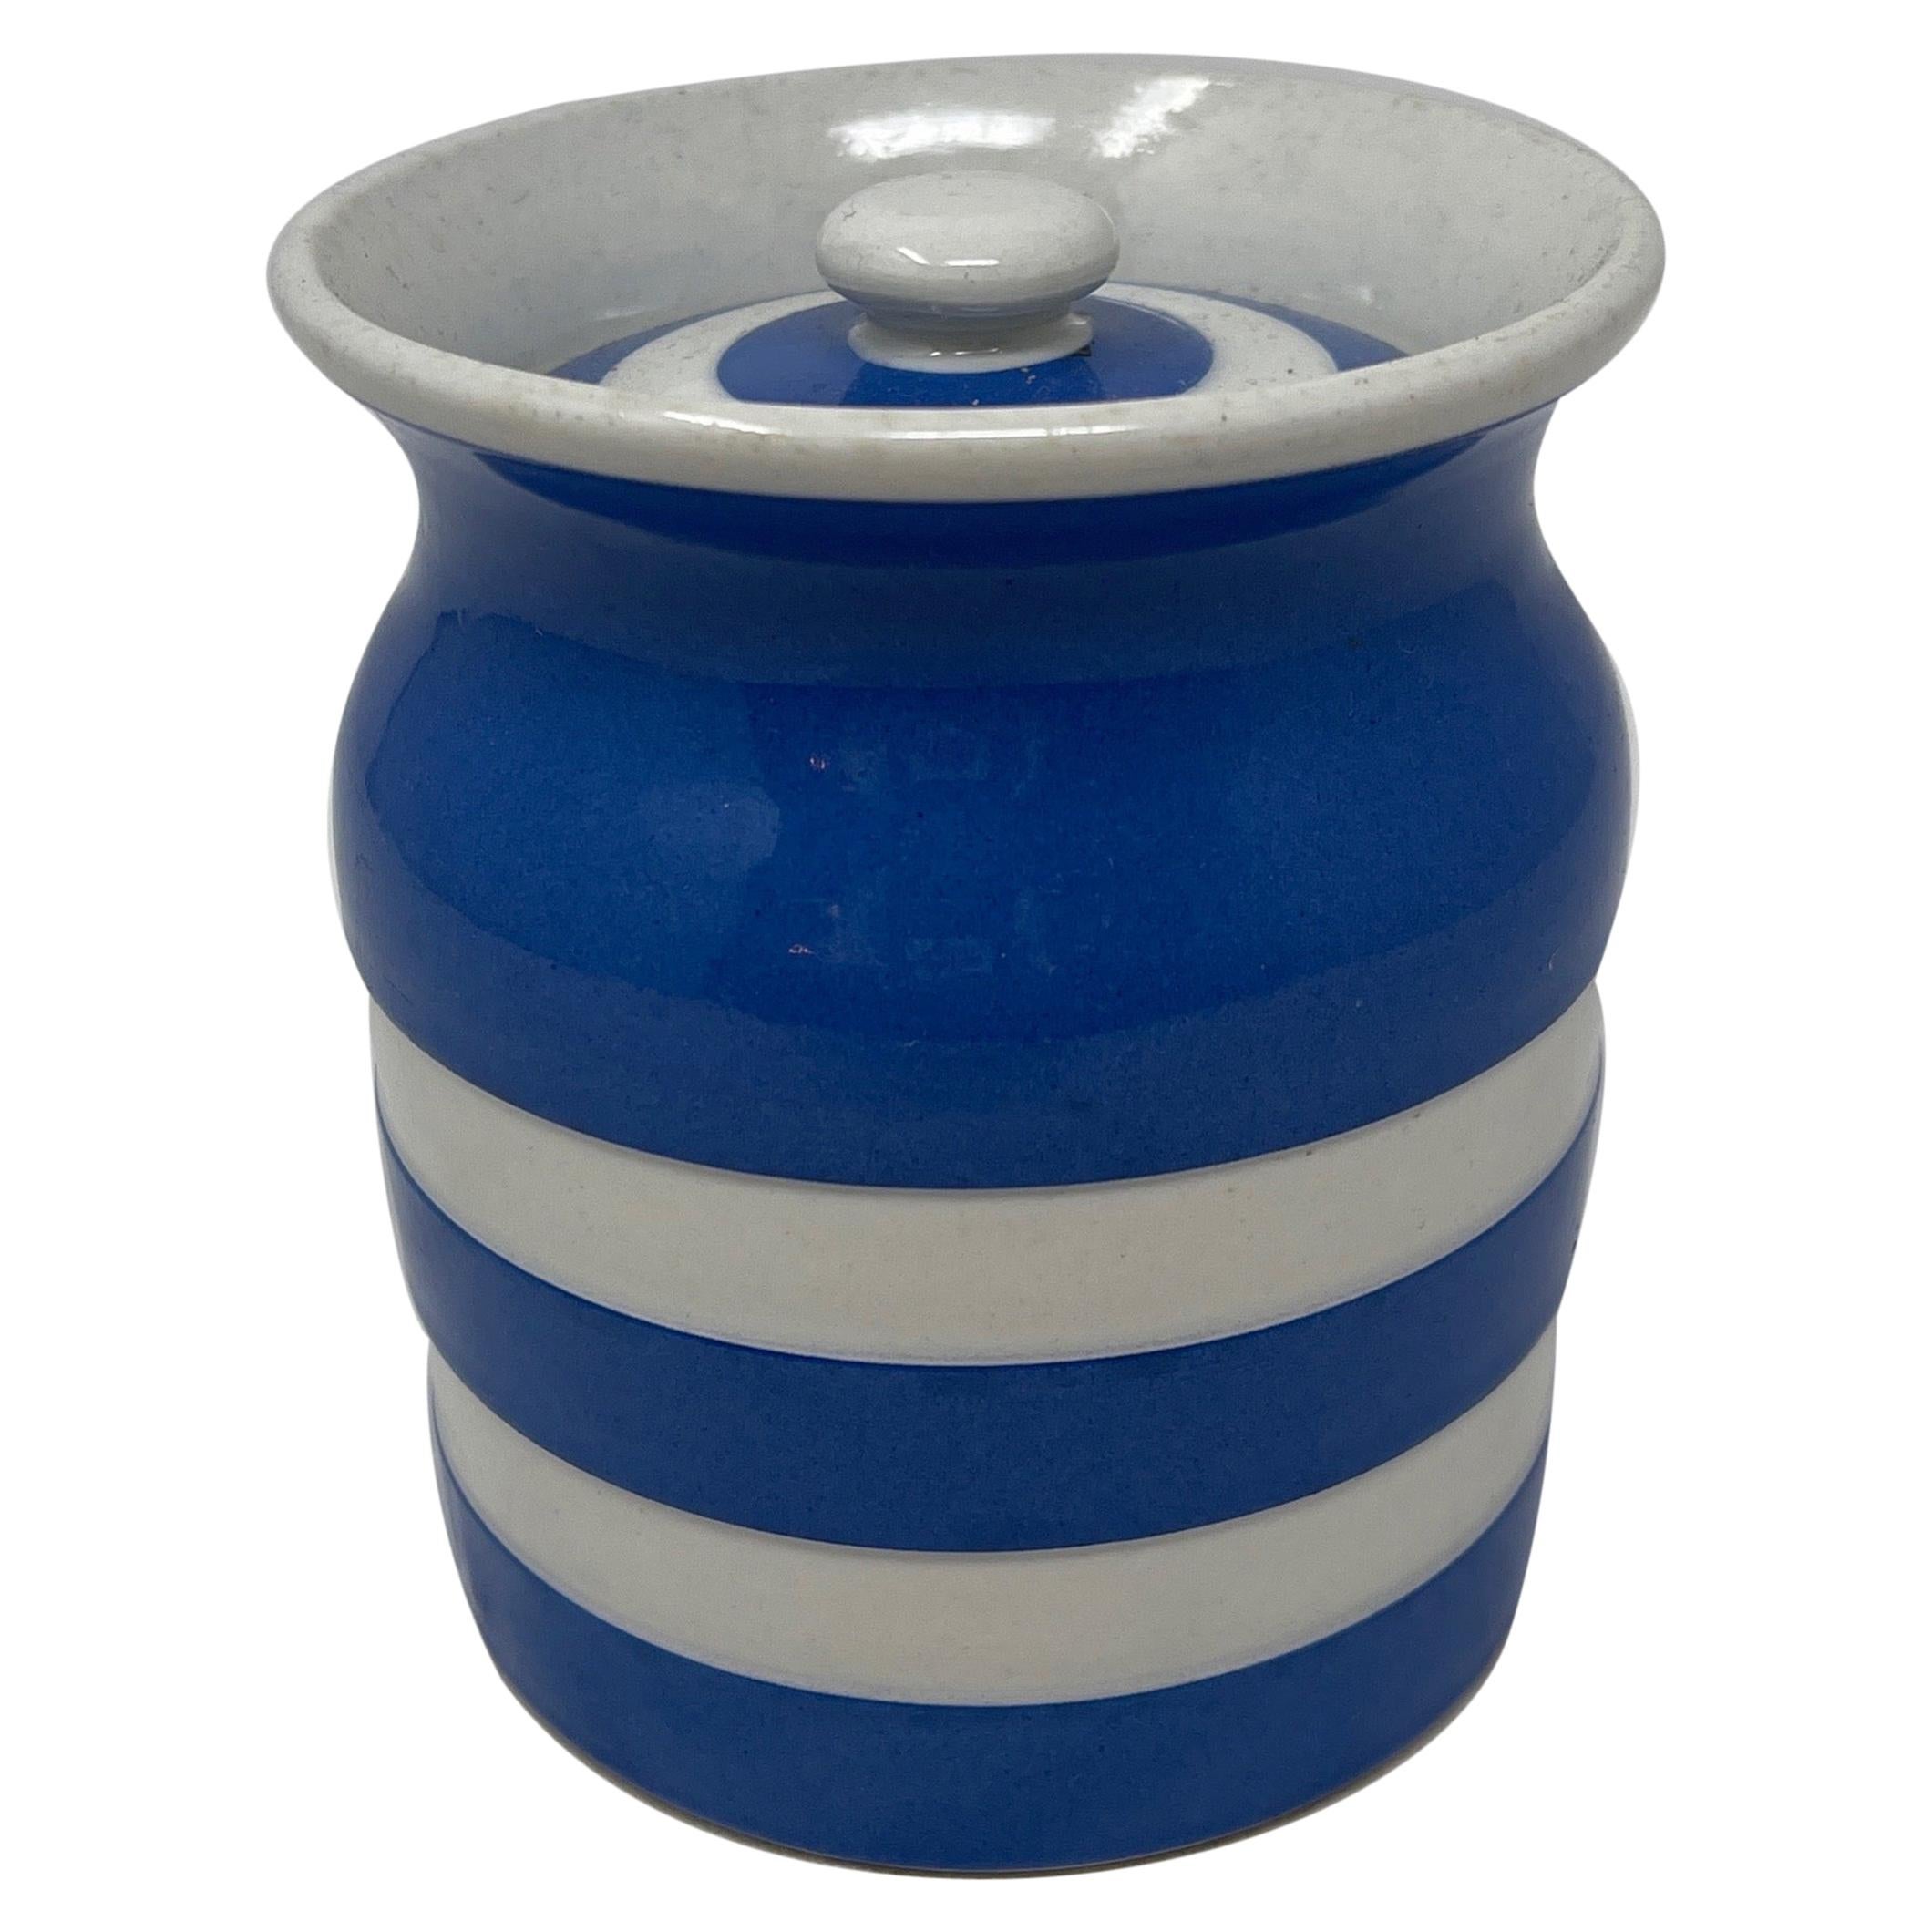 T.G. Green Cornishware Canister